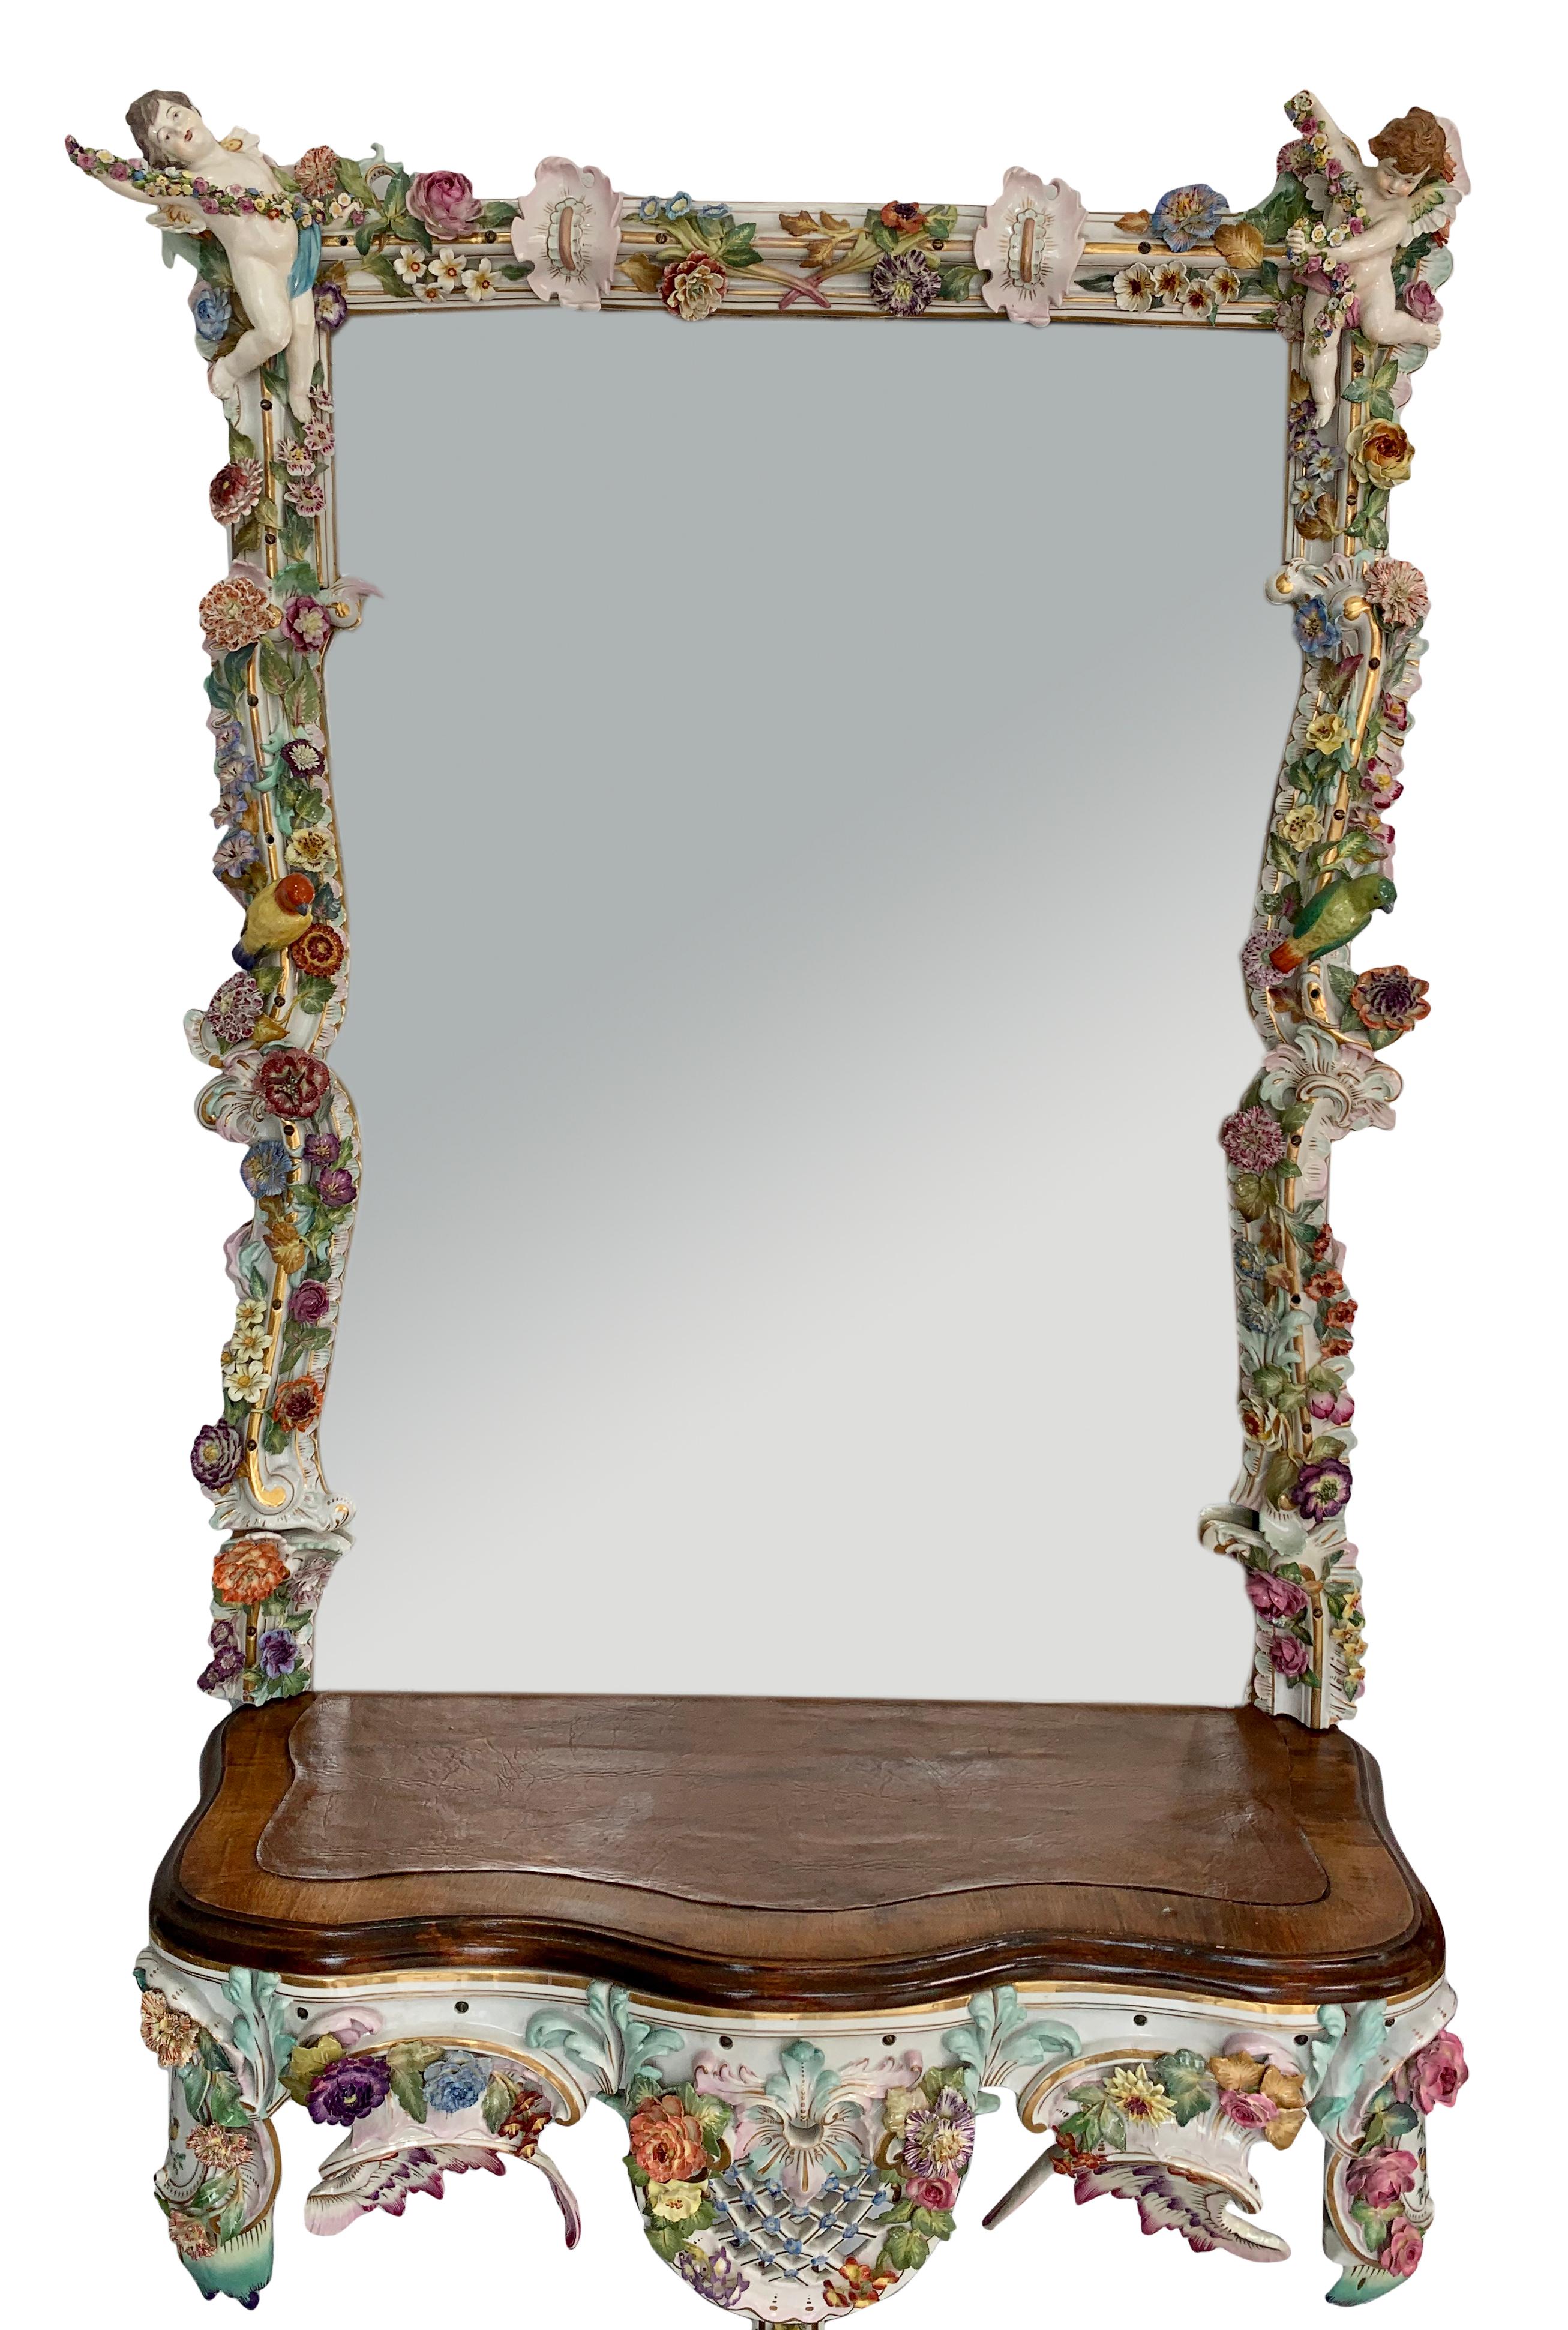 A very rare early 20th century German Rococo style hand painted porcelain figural console and mirror. The rectangular plate within a border richly decorated with flowers, birds, foliage, flanked by two cherubs holding garlands of flowers resting on